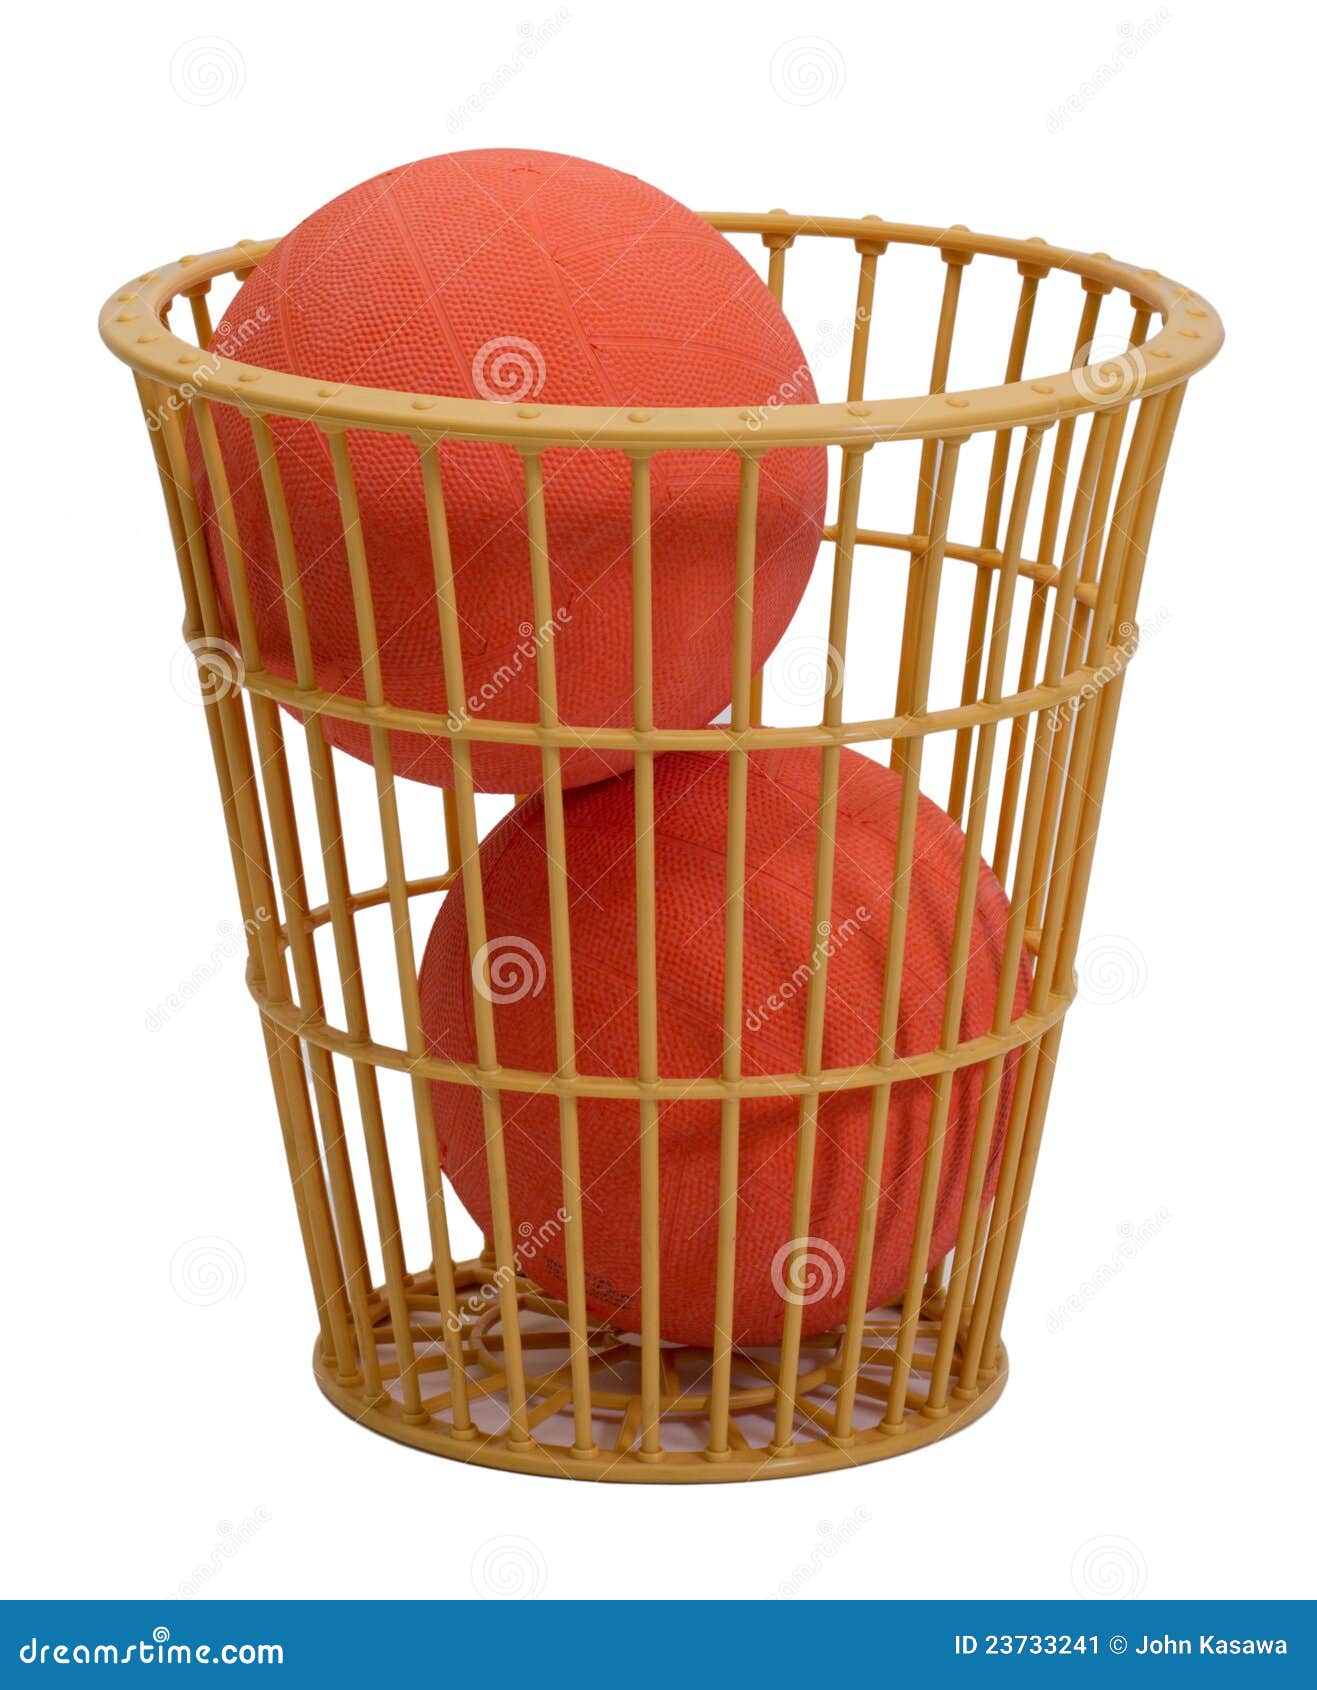 Net Ball Or Chair Ball Stock Image Image Of Champion 23733241